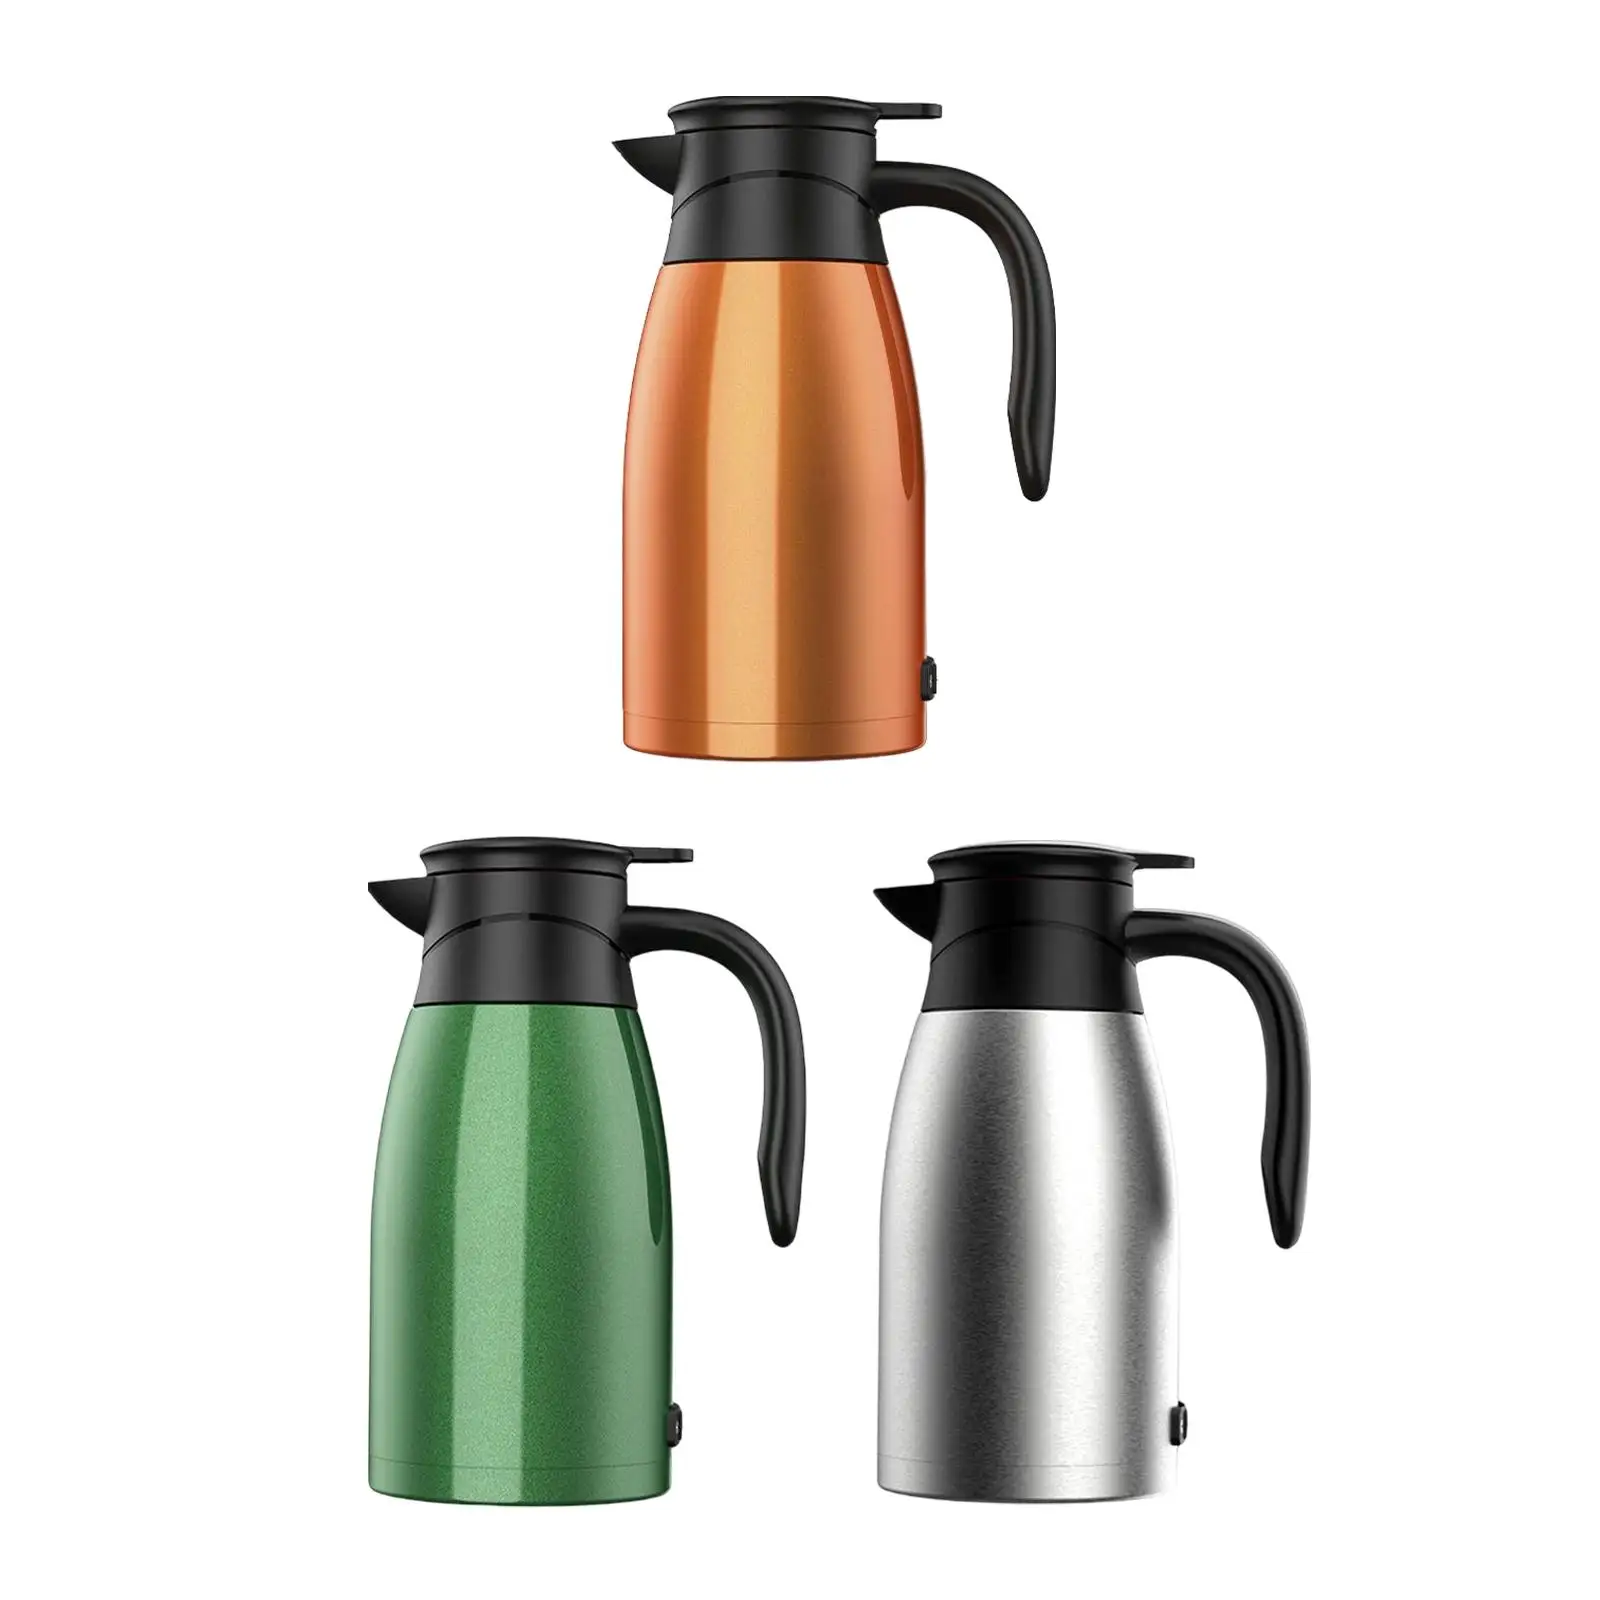 Portable 24V Car Truck Kettle Boiler 1400ml Intelligent Temp Display Heated Water Boiler Hot Water Kettle for Tea Camping